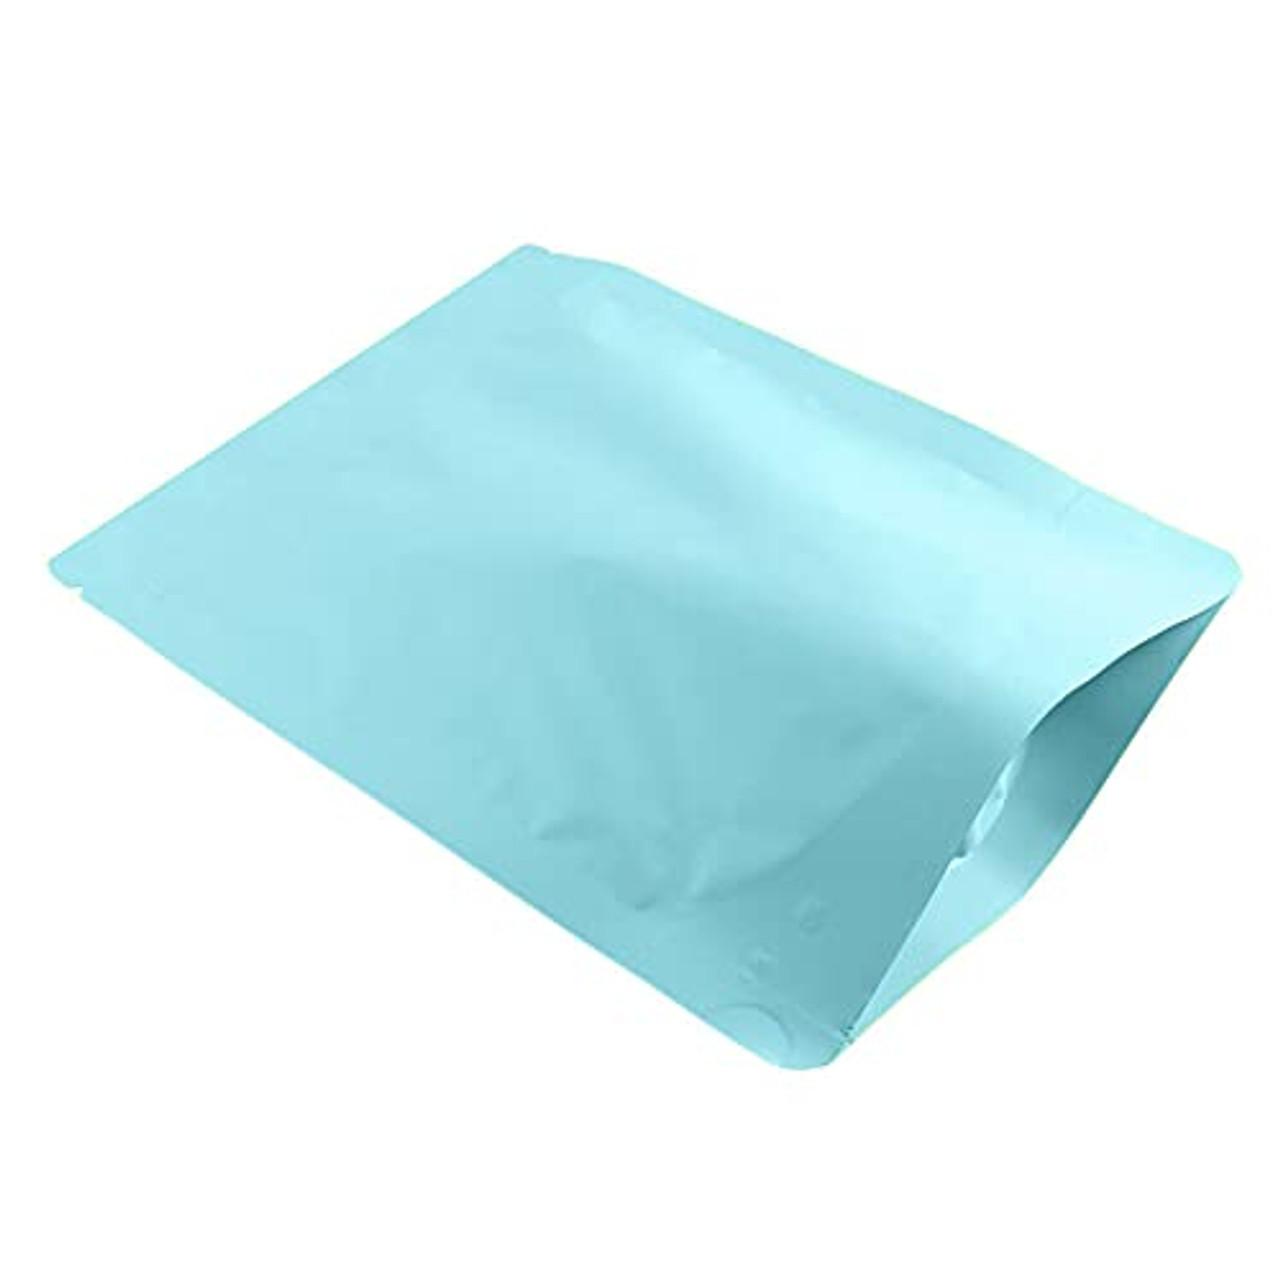 100pcs Stand-up Mylar Bags Colorful Aluminum Foil Food Safe Zipper Seal  Packaging Bags for Food